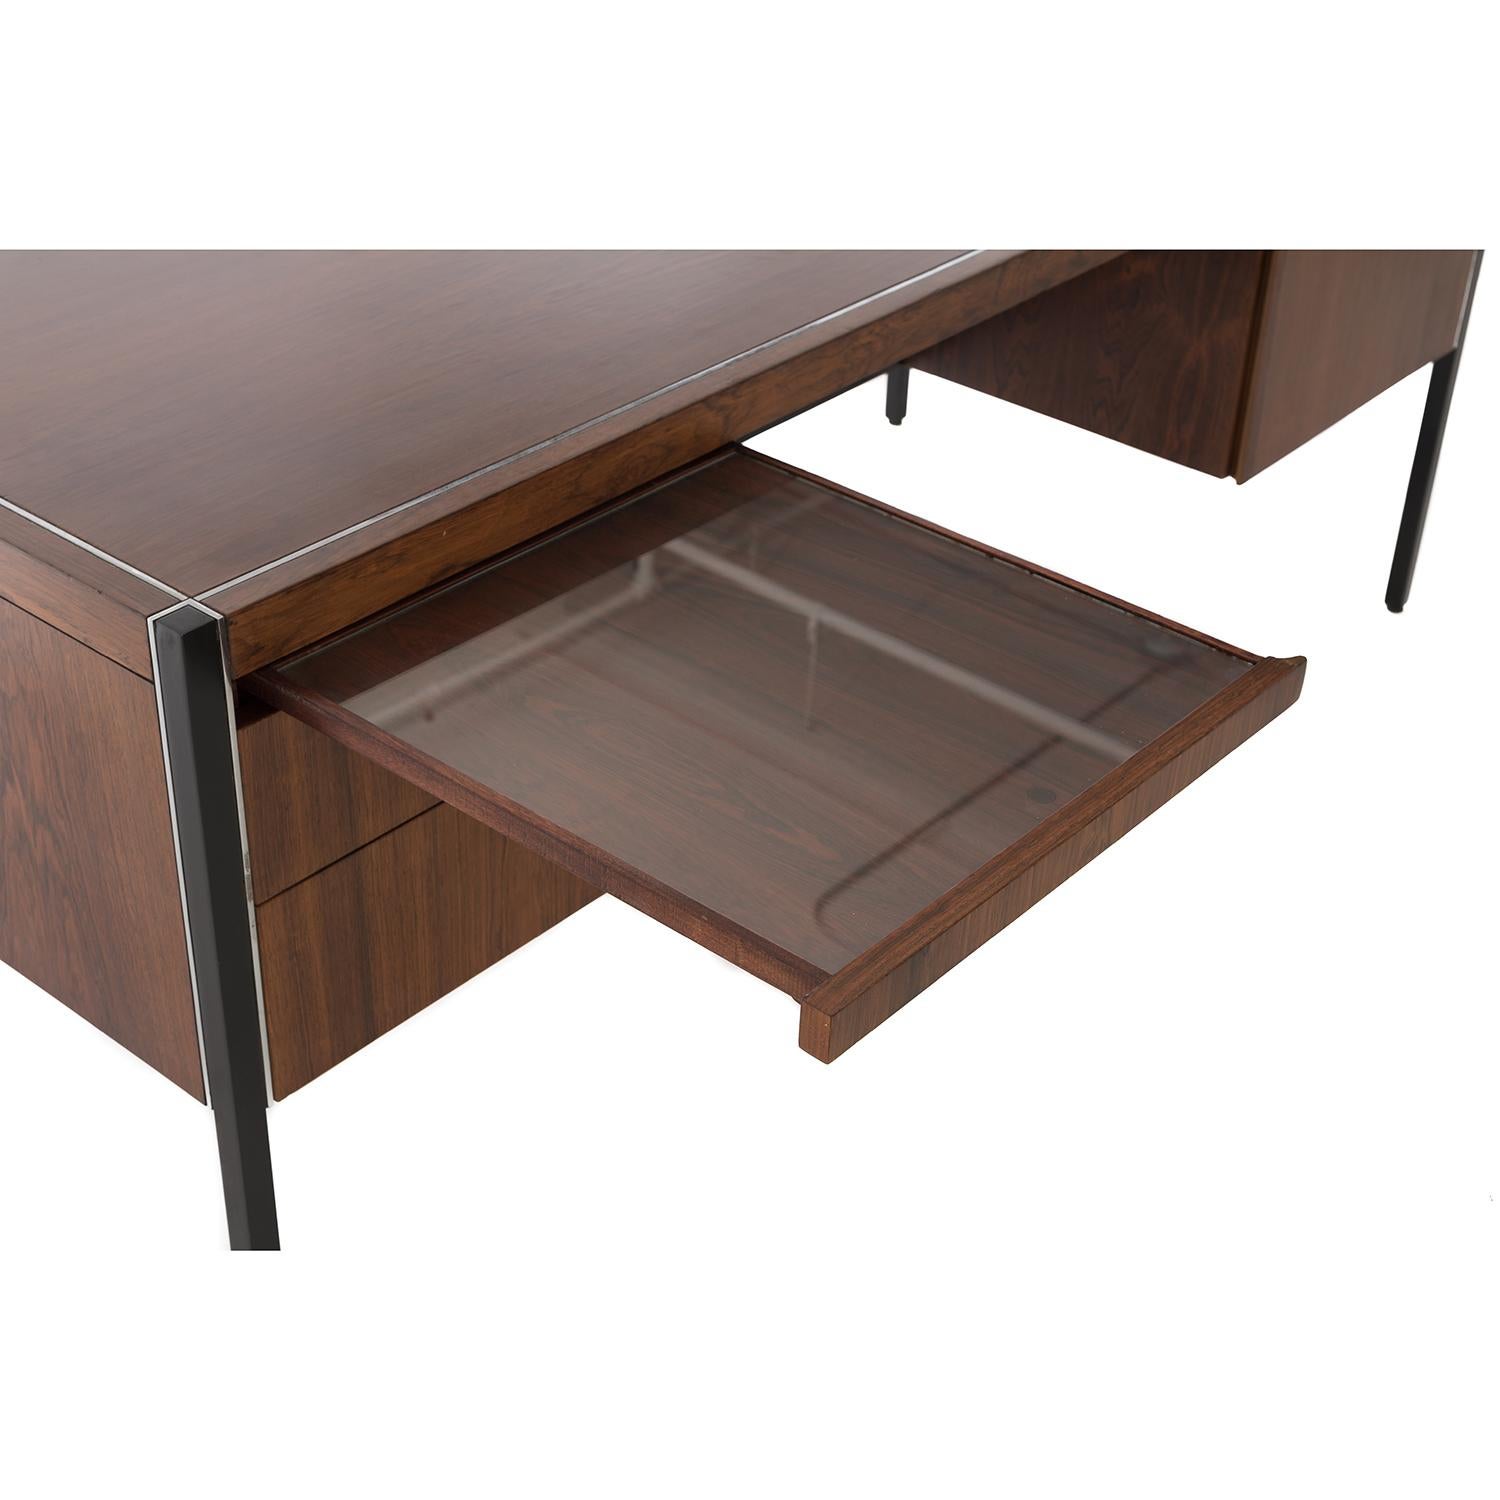 American Midcentury Executive Desk in Rosewood by Richard Schultz for Knoll